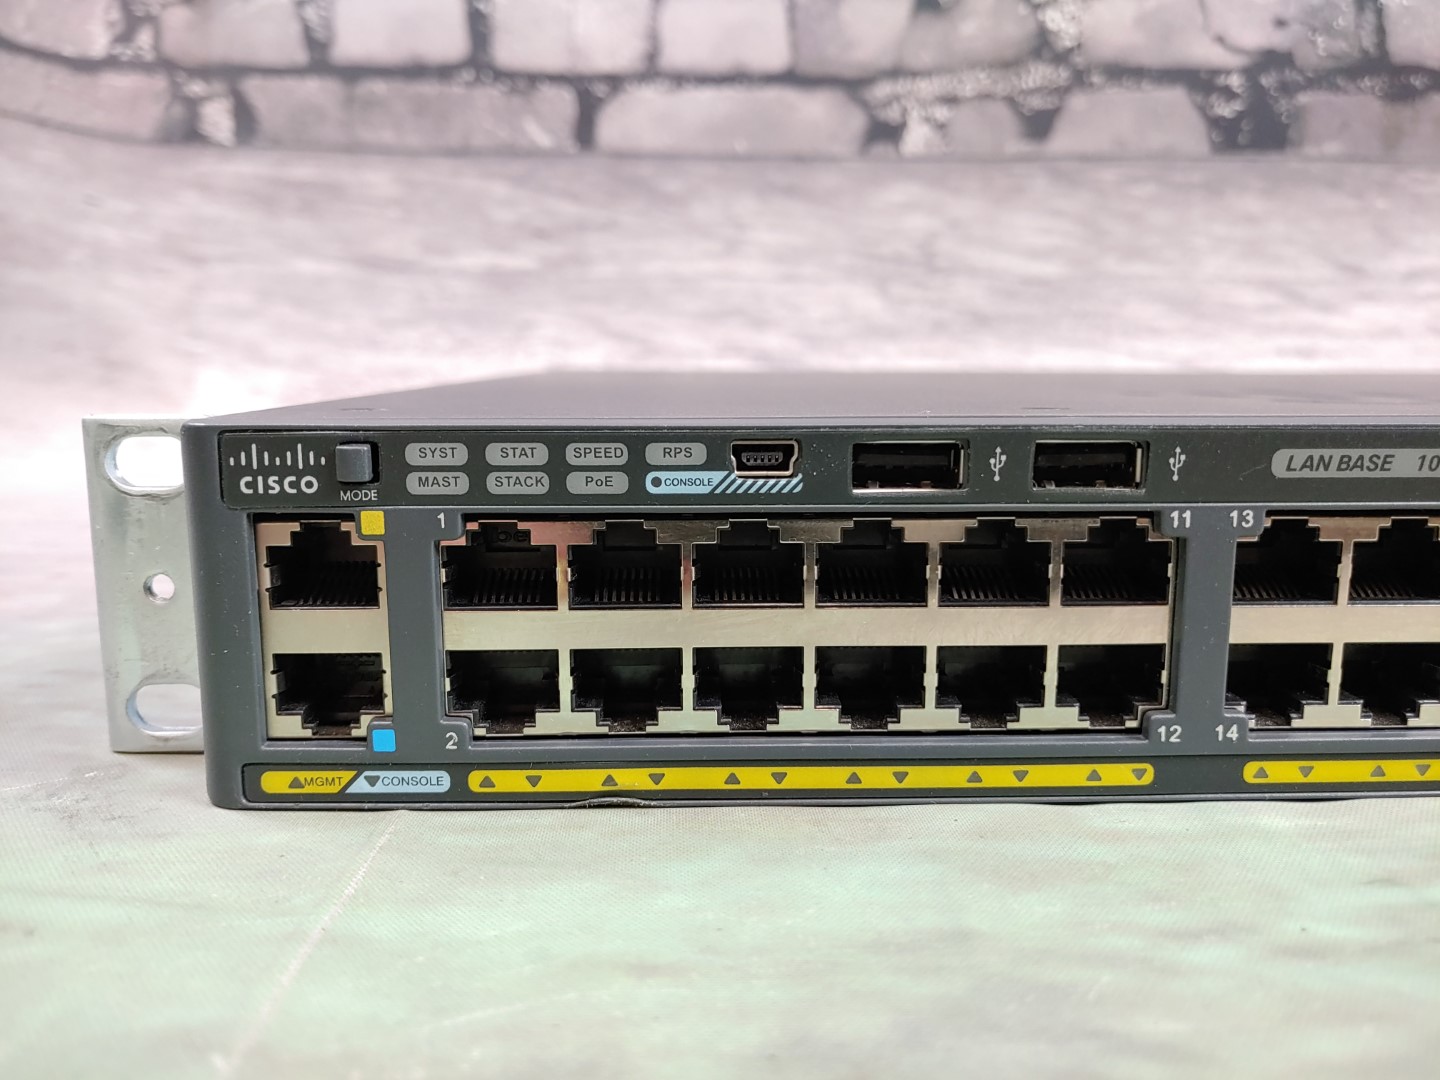 Lights flash for a bit and unit shuts off. Minor scratches/scuffs. **NO POWER CORD INCLUDED**Item Specifics: MPN : WS-C2960X-48FPD-LUPC : N/AType : Ethernet SwitchForm Factor : Rack-MountableBrand : CiscoModel : WS-C2960X-48FPD-LNetwork Connectivity : Wired-Ethernet (RJ-45)Number of LAN Ports : 48Ethernet Technology : Gigabit Ethernet (1000-Mbit/s) - 1